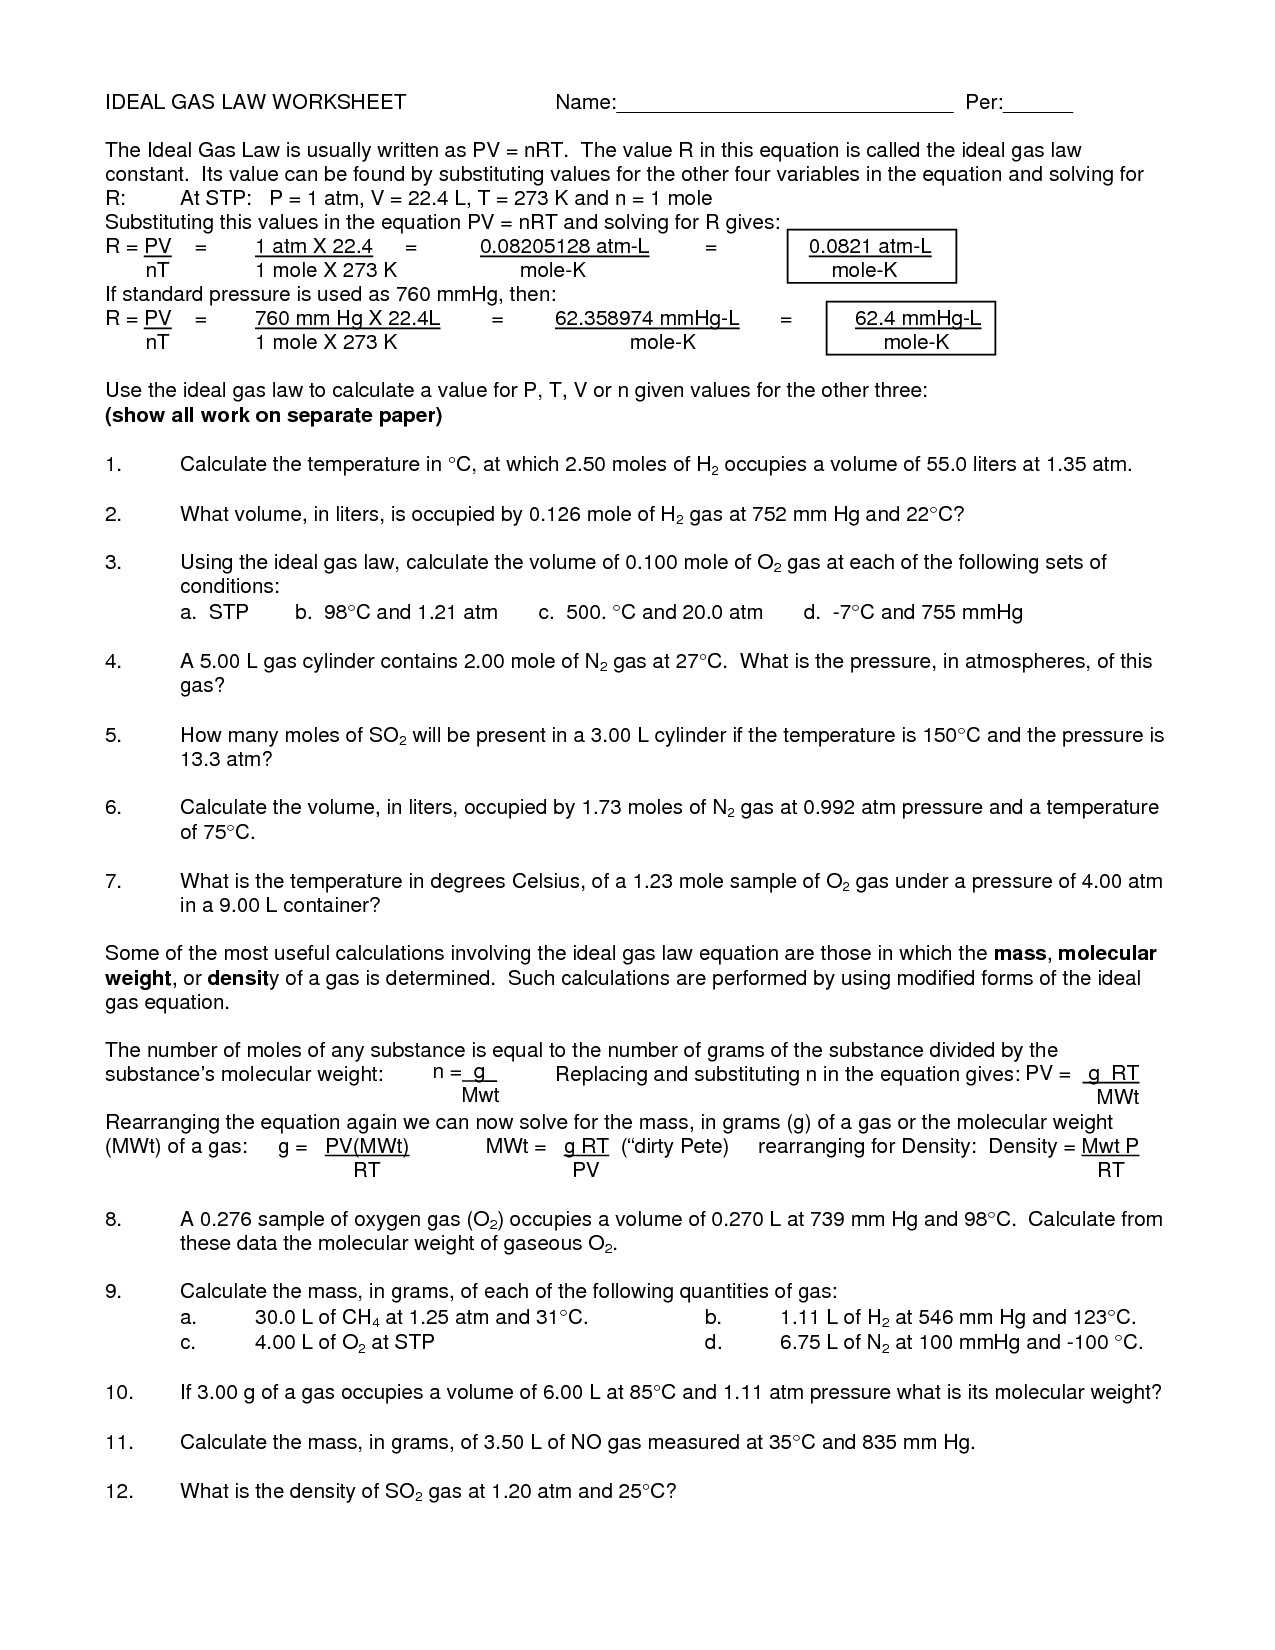 Domain and Range Worksheet 2 Answer Key with Gas Laws Worksheet 1 Answer Key Elegant Newtons Laws Motion and